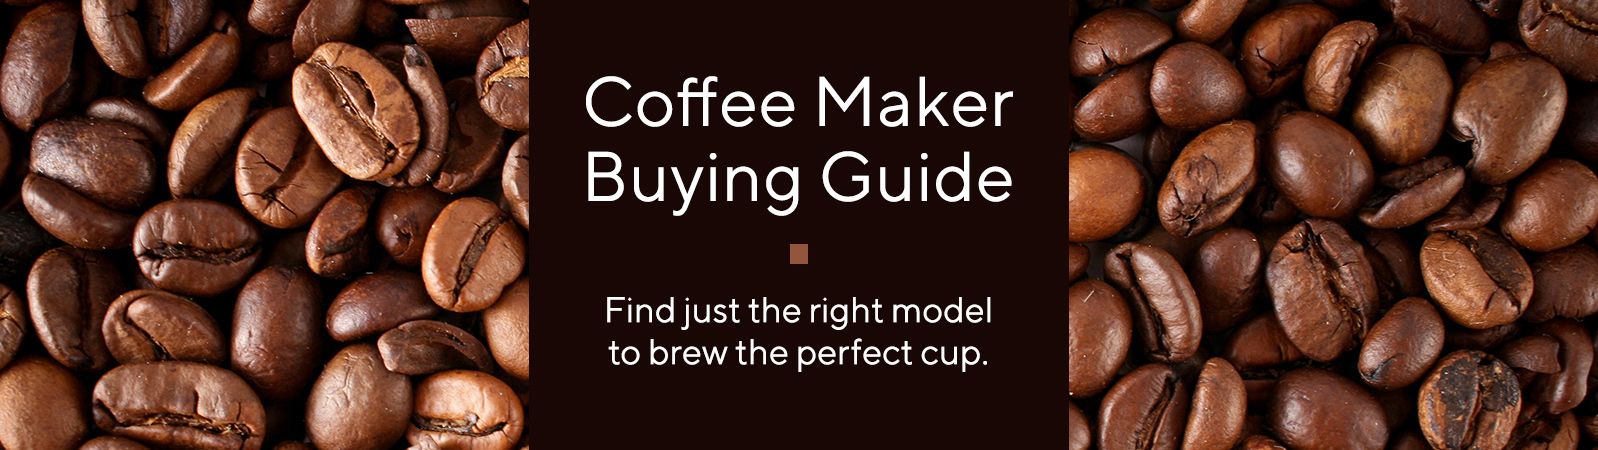 Coffee Maker Buying Guide  Find just the right model to brew the perfect cup. 